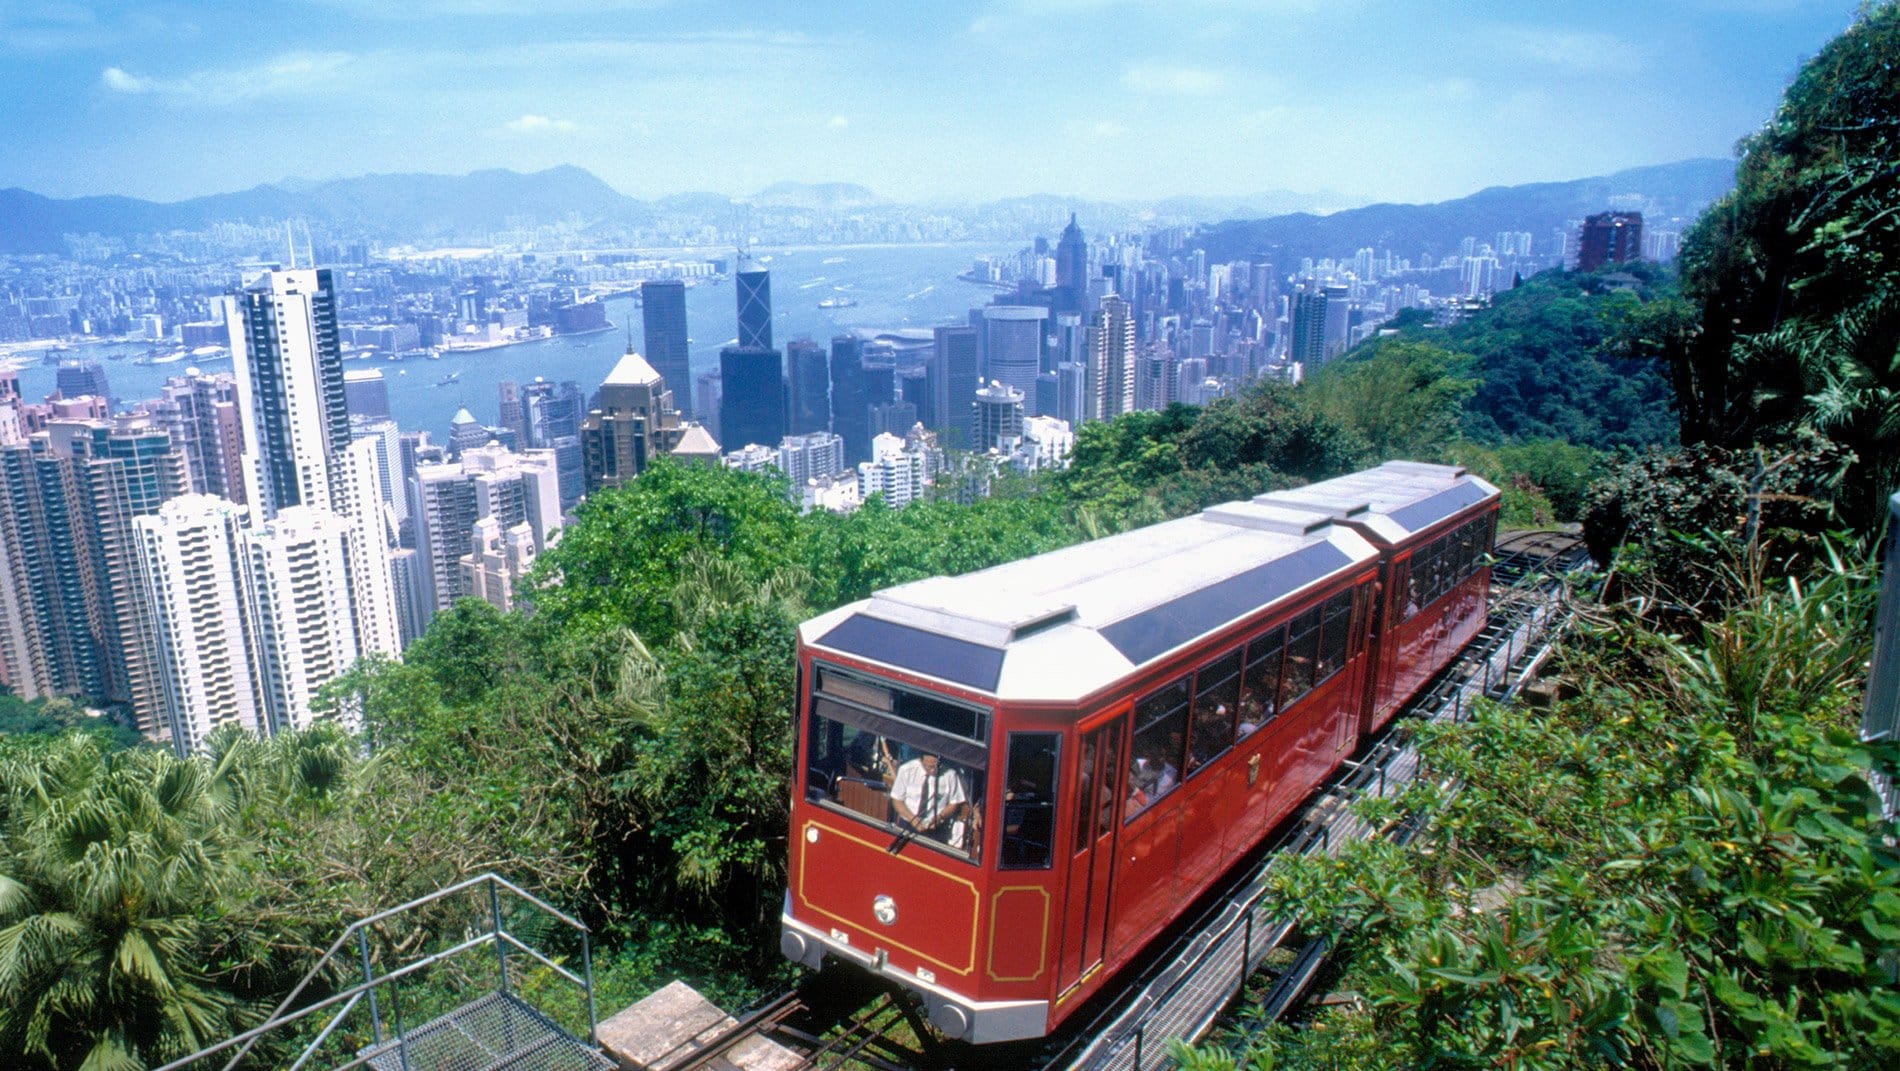 Victoria Peak~Since 1888 the Peak Tram has been carrying people from Central to the Peak to enjoy the cooler air and panoramic view over the downtown and harbor. From 2019 - 2020, it is enjoying a multi-million dollar renovation to double its capacity and improve facilities.